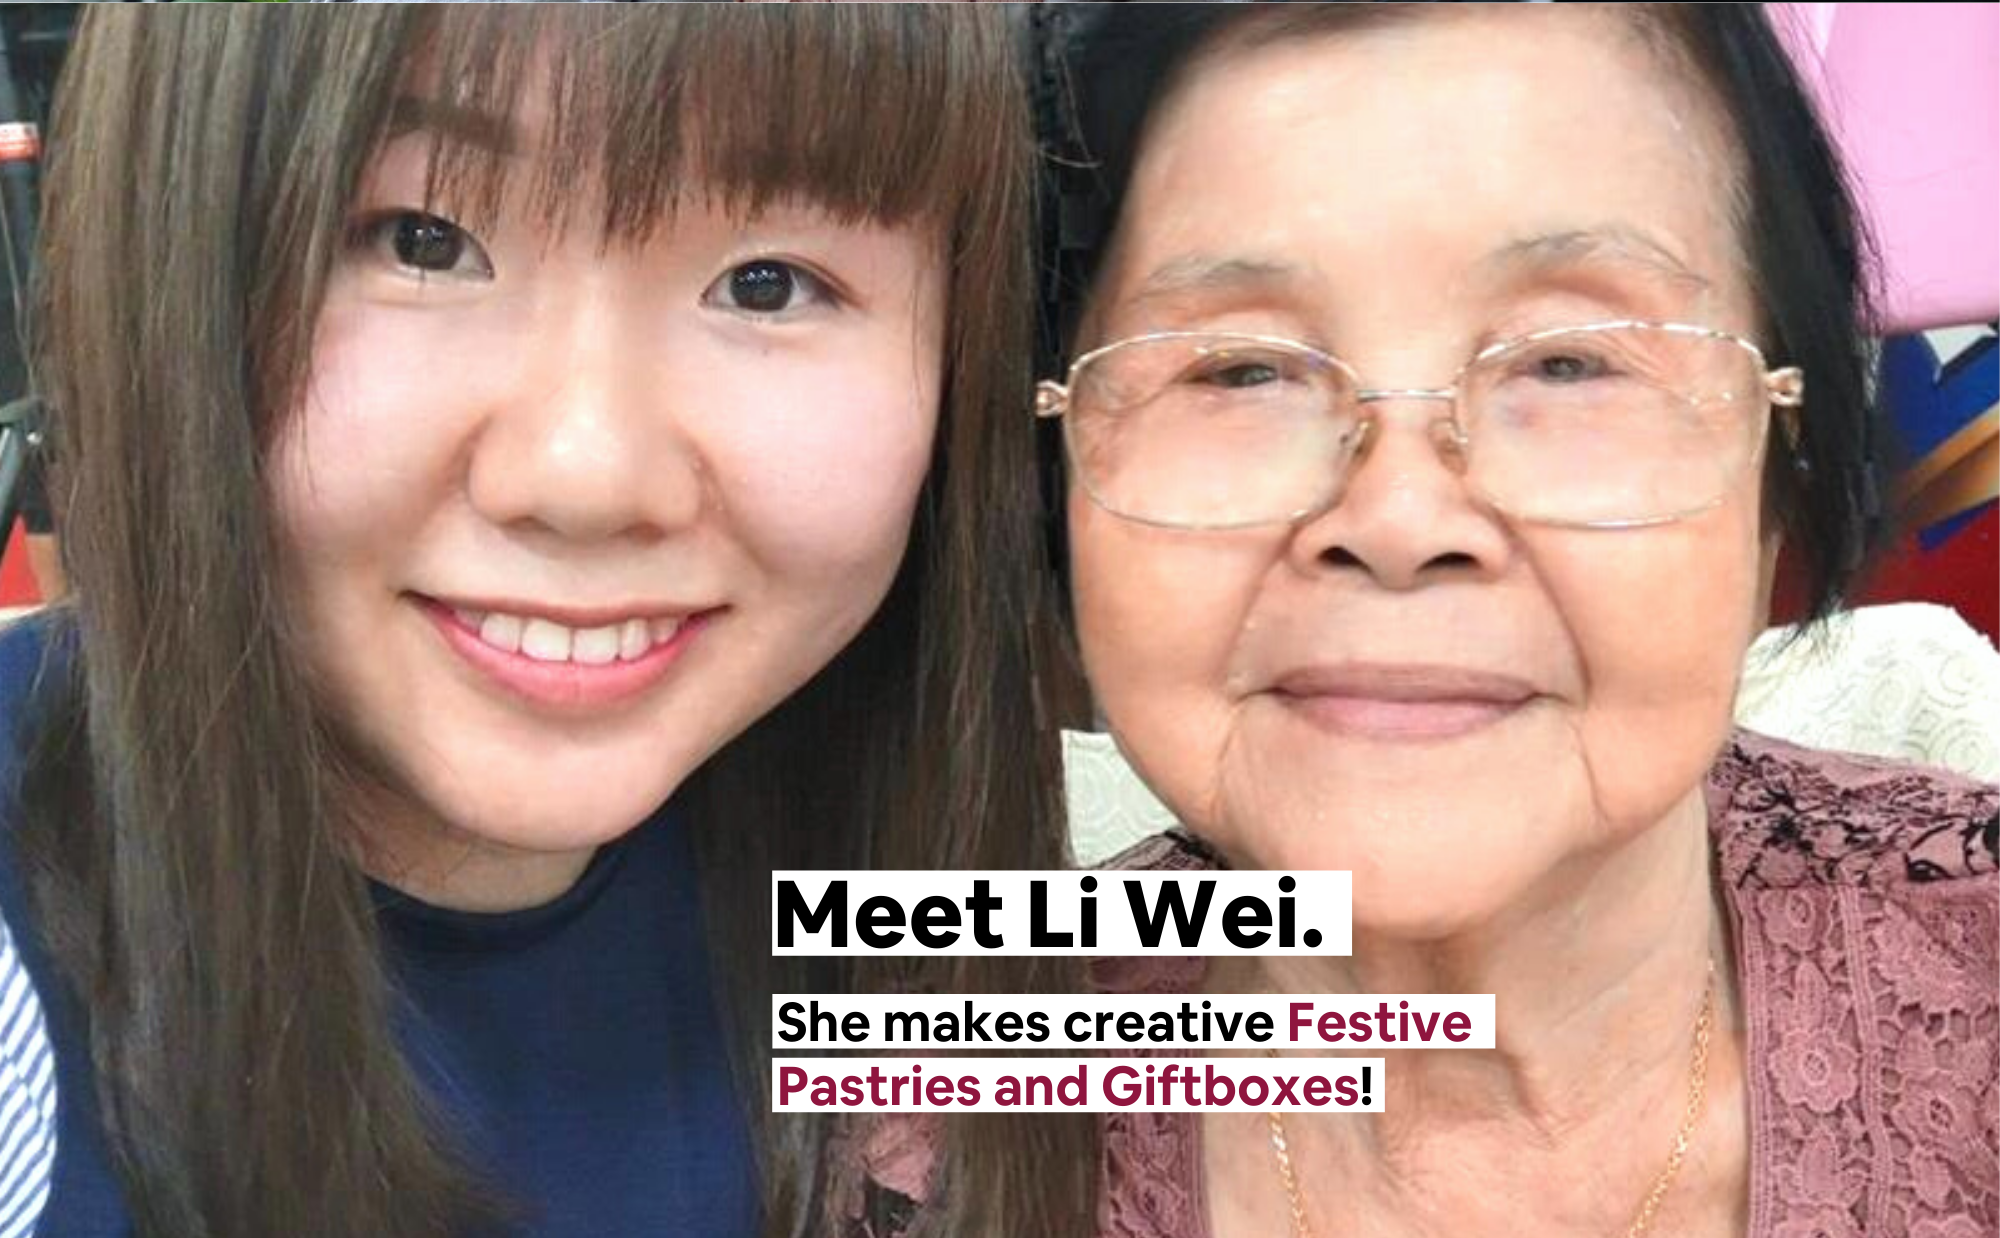 Meet our homechef - Li Wei. She makes creative Festive Pastries and Giftboxes.